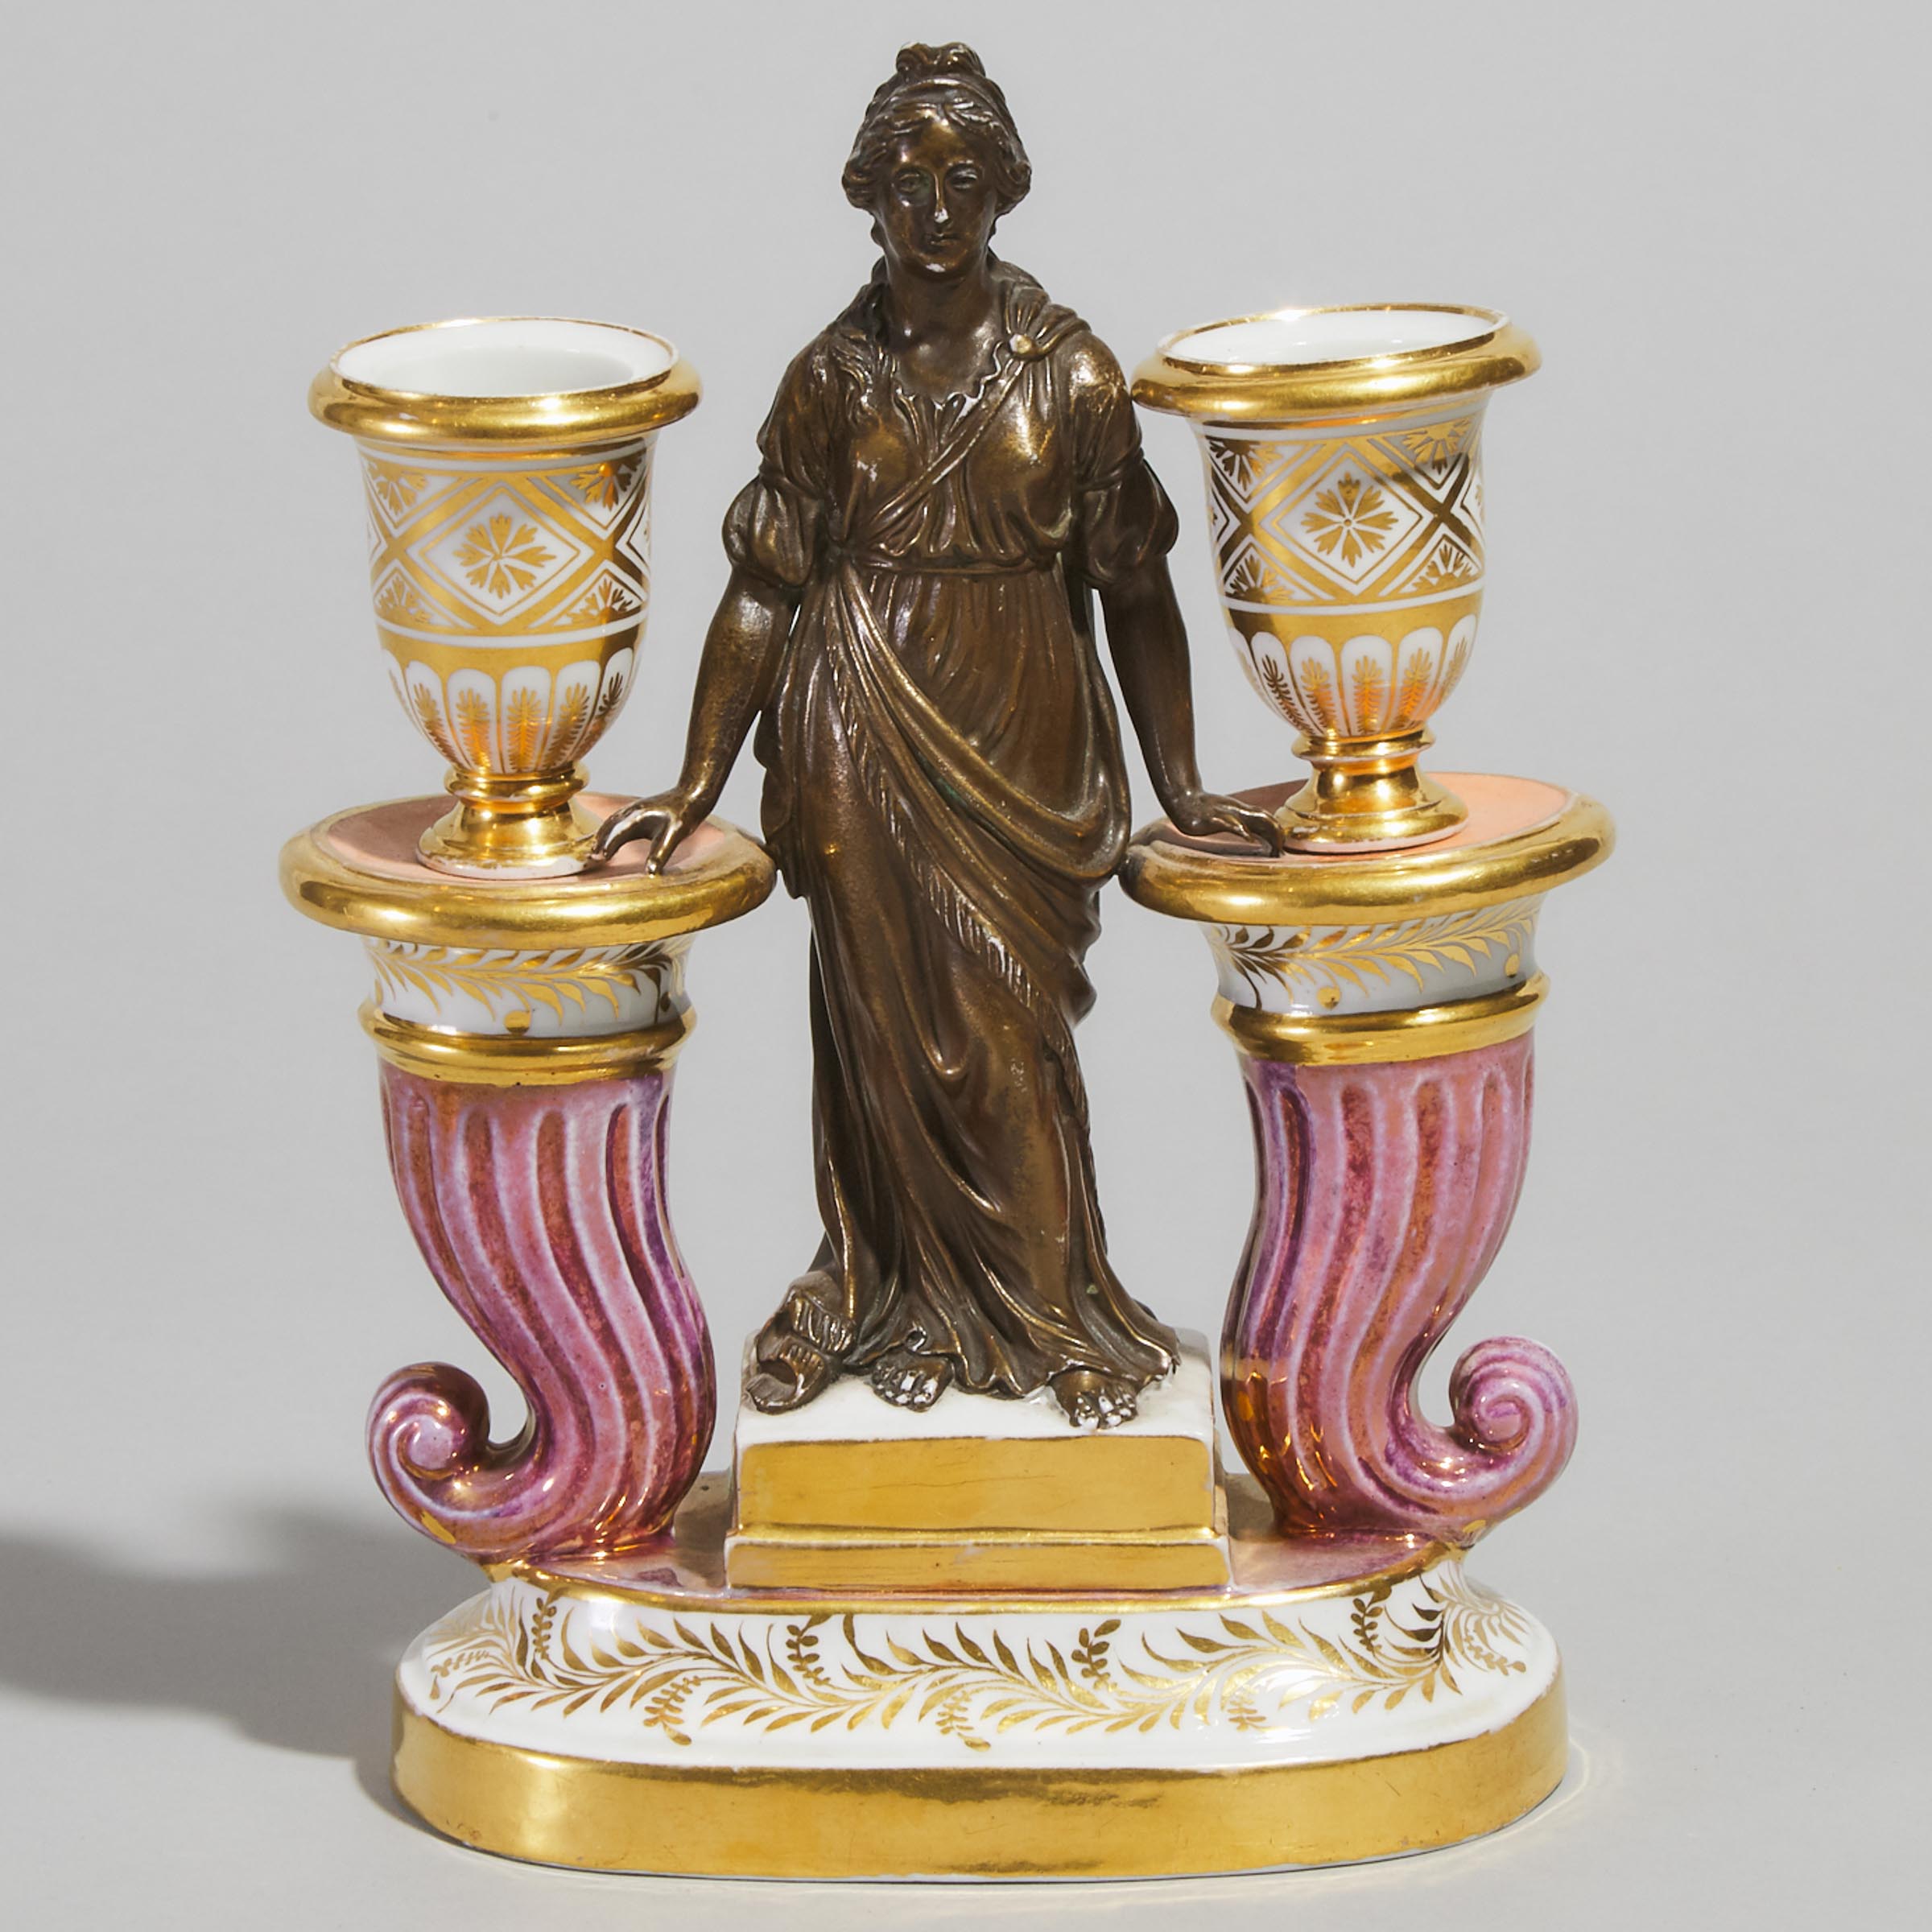 English Porcelain Classical Figure Two-Light Candlestick, probably Coalport, early 19th century